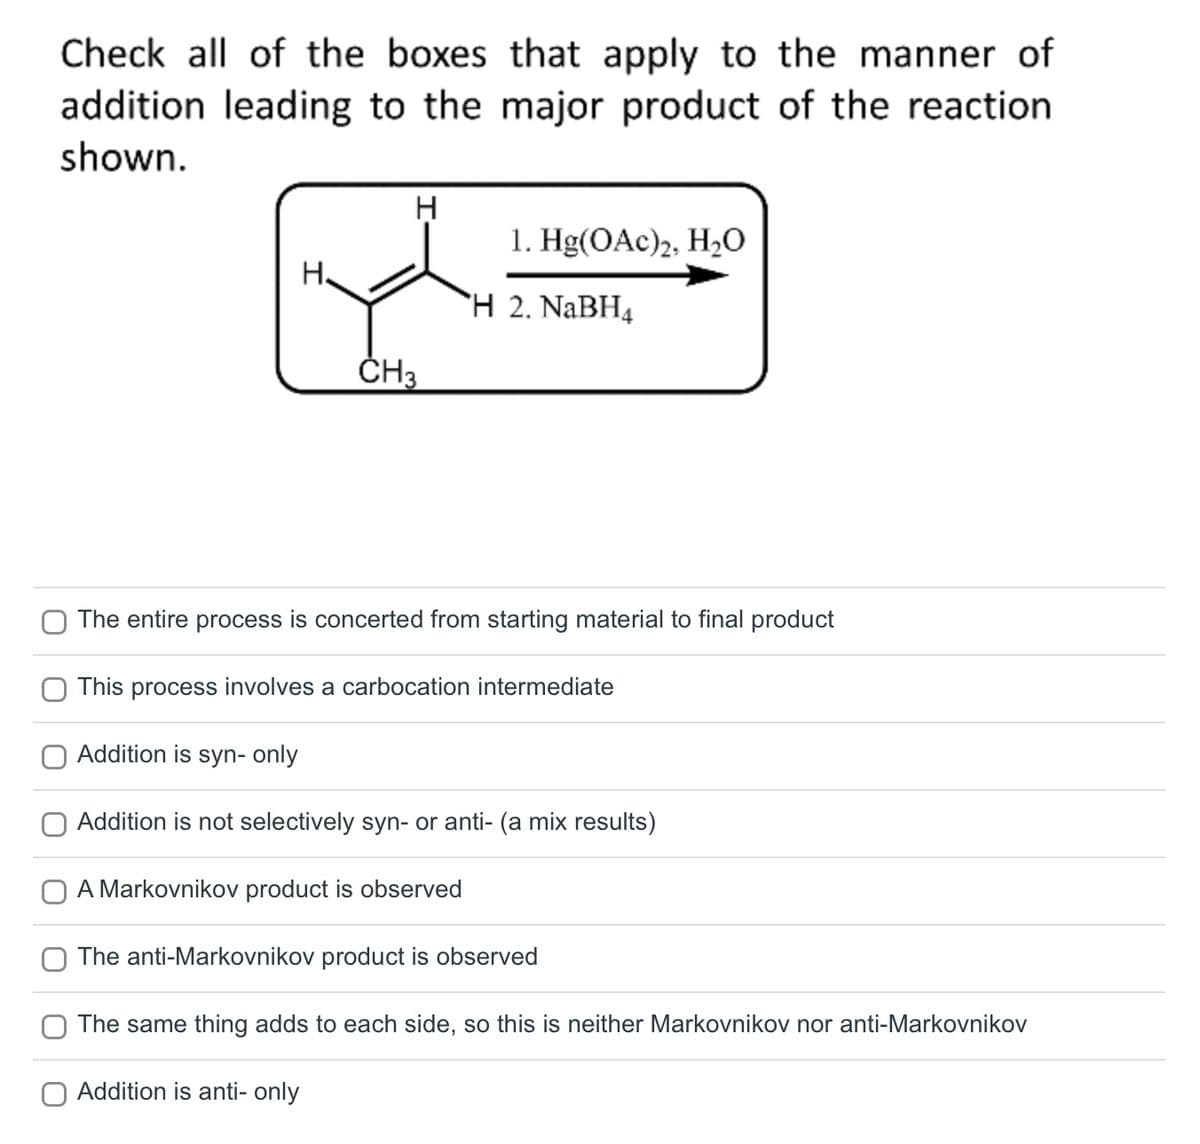 Check all of the boxes that apply to the manner of
addition leading to the major product of the reaction.
shown.
H.
H
CH3
1. Hg(OAc)2, H₂0
H 2. NaBH4
The entire process is concerted from starting material to final product
This process involves a carbocation intermediate
Addition is syn- only
Addition is not selectively syn- or anti- (a mix results)
O A Markovnikov product is observed
The anti-Markovnikov product is observed
The same thing adds to each side, so this is neither Markovnikov nor anti-Markovnikov
Addition is anti- only